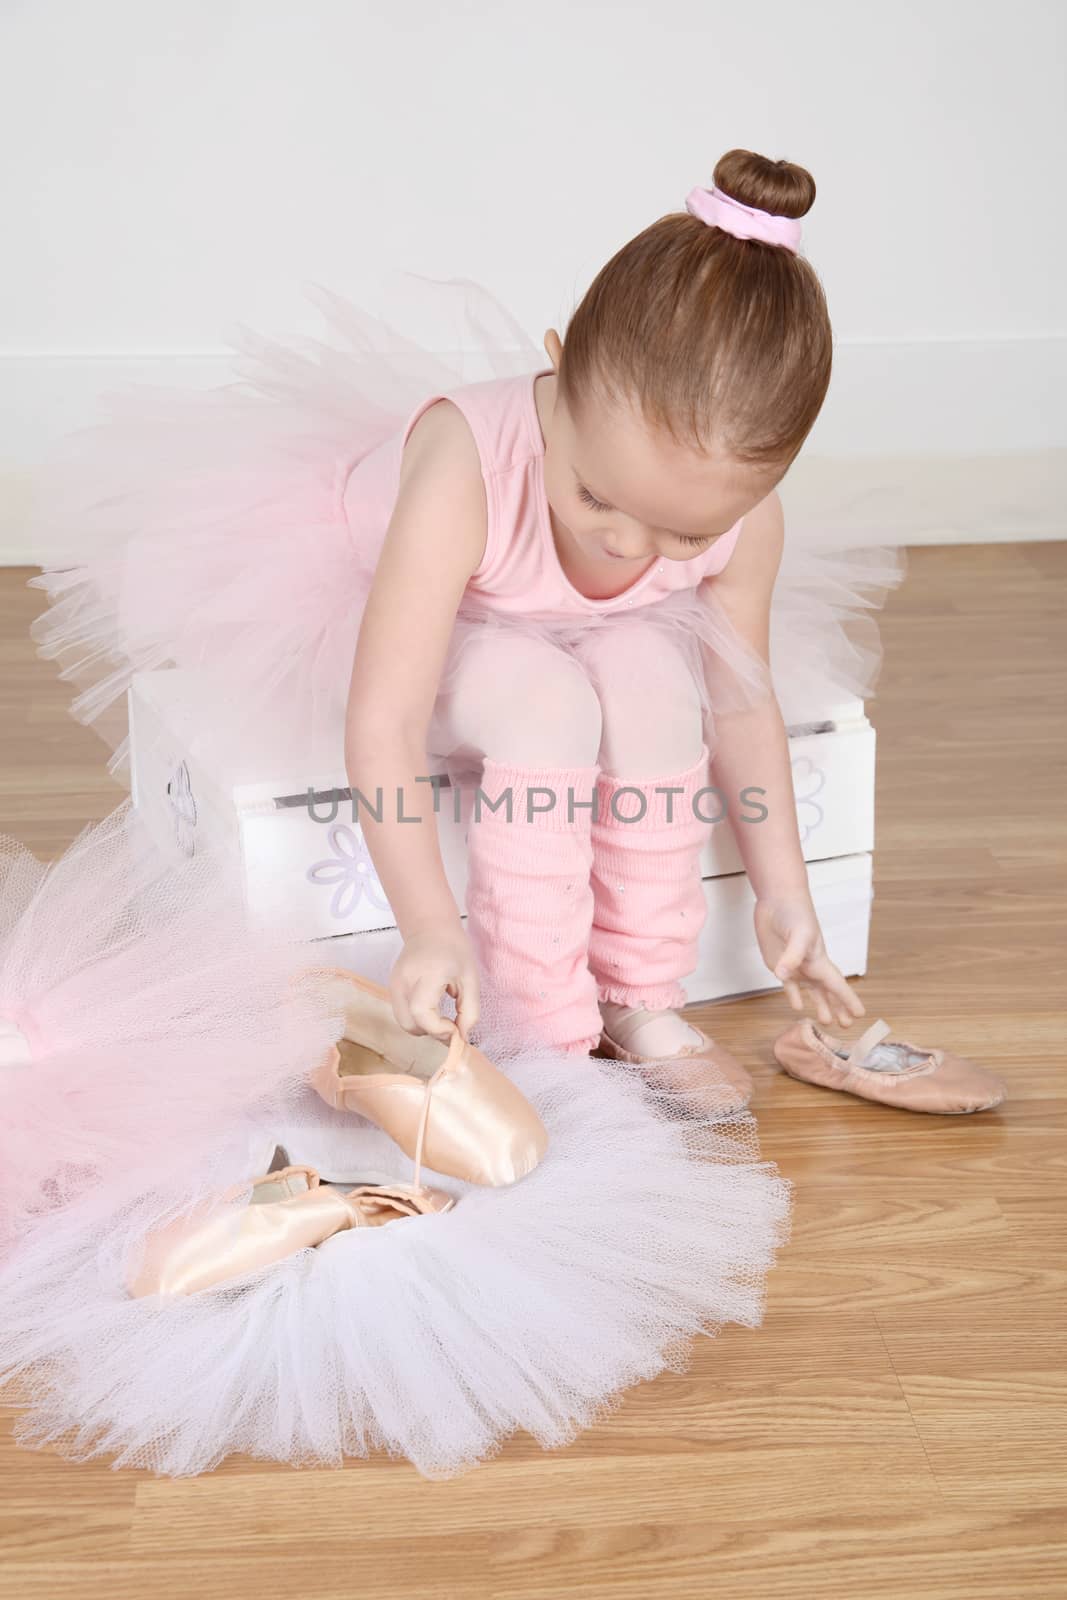 Little ballet girl trying on shoes at the ballet studio